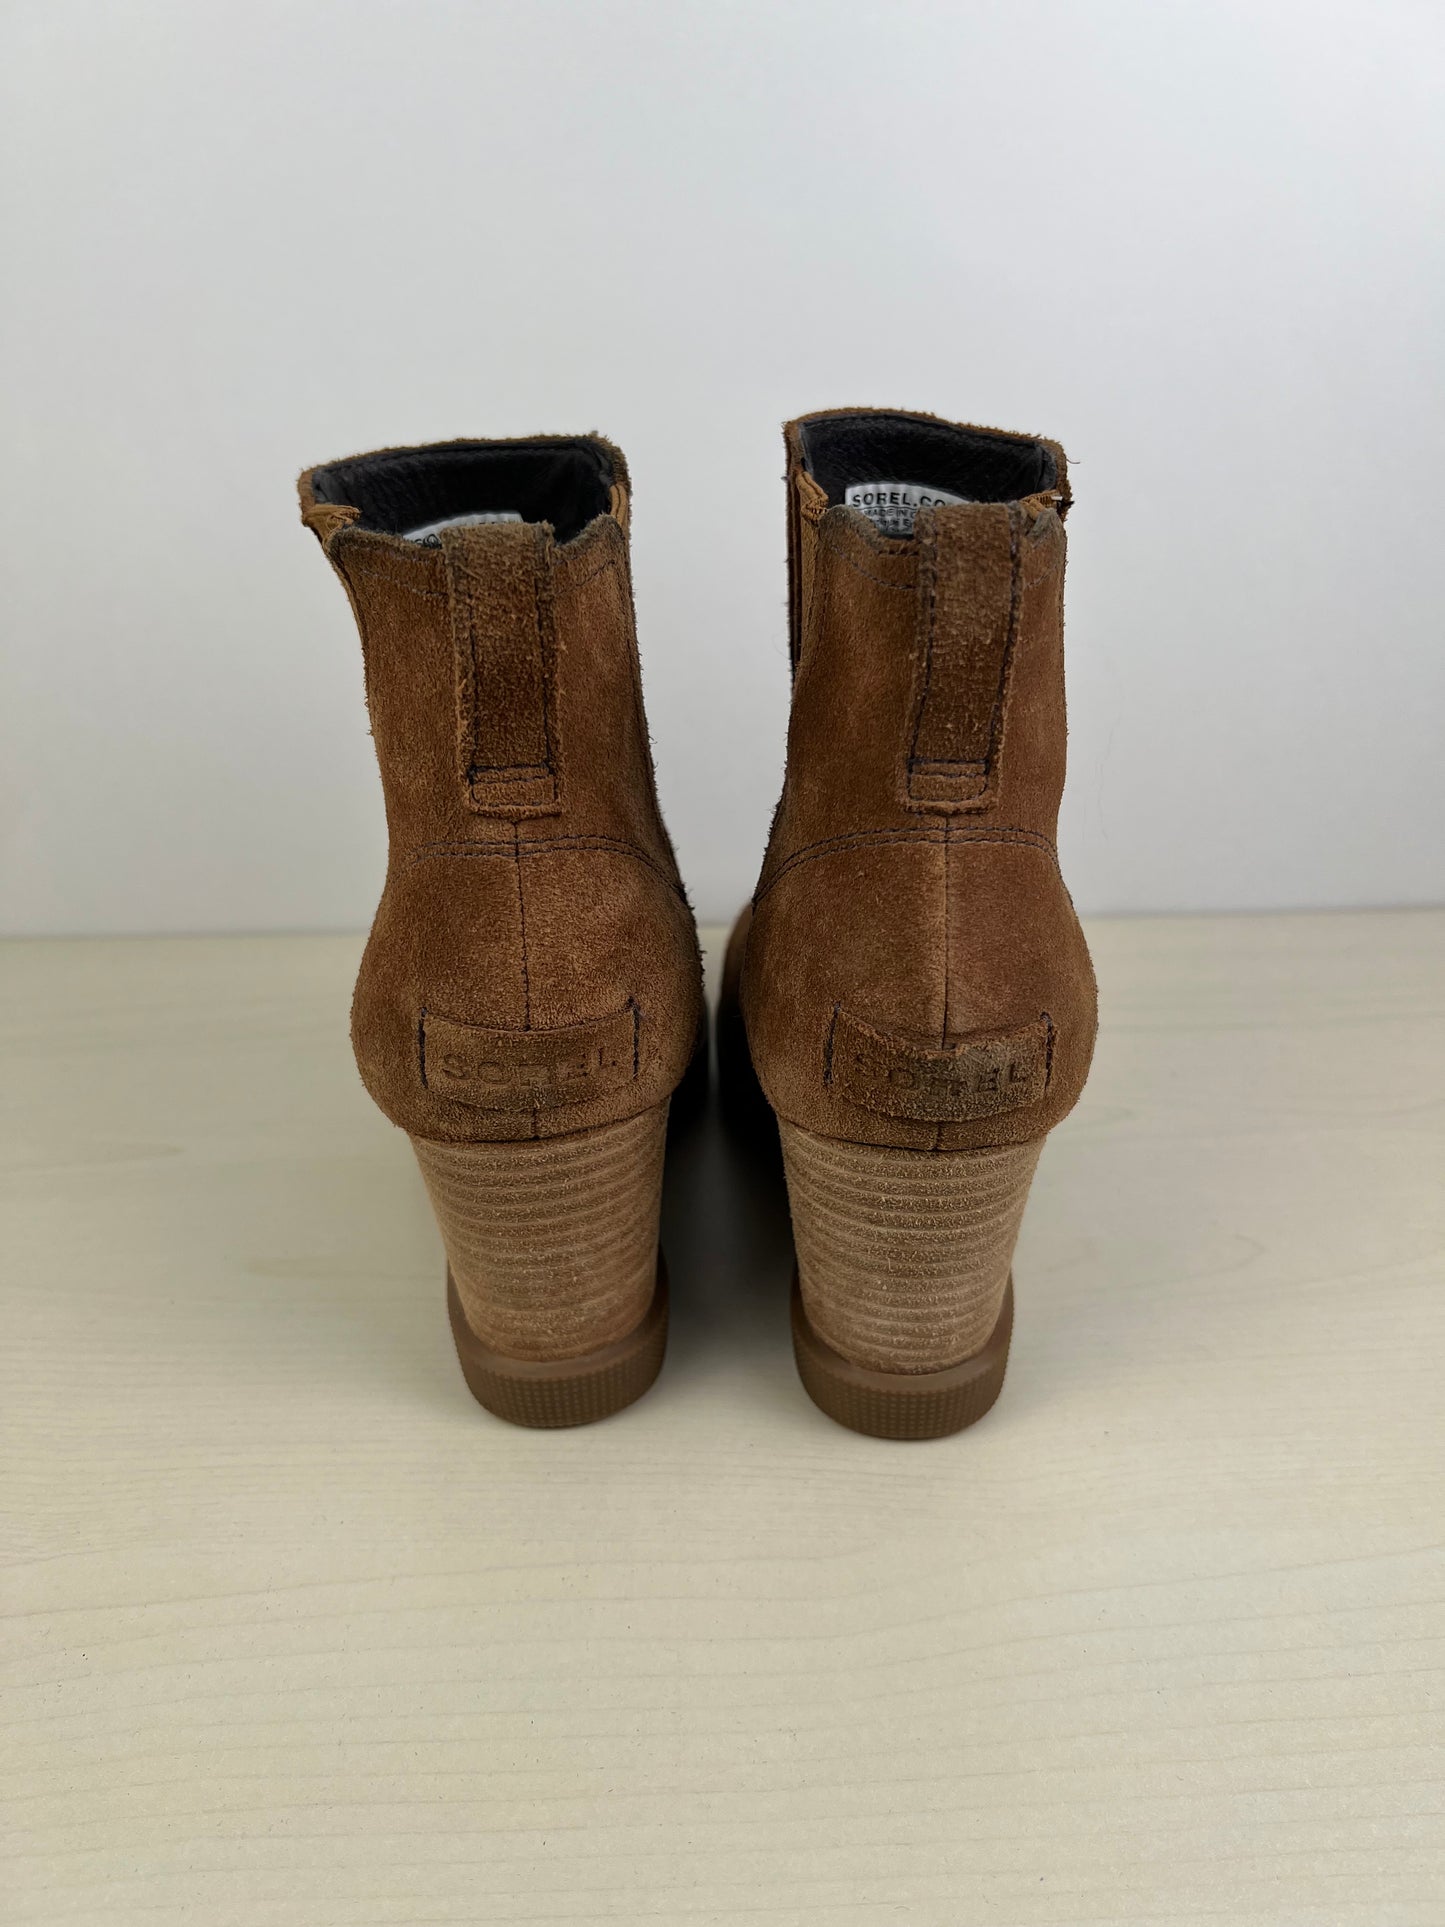 Boots Ankle Heels By Sorel  Size: 8.5